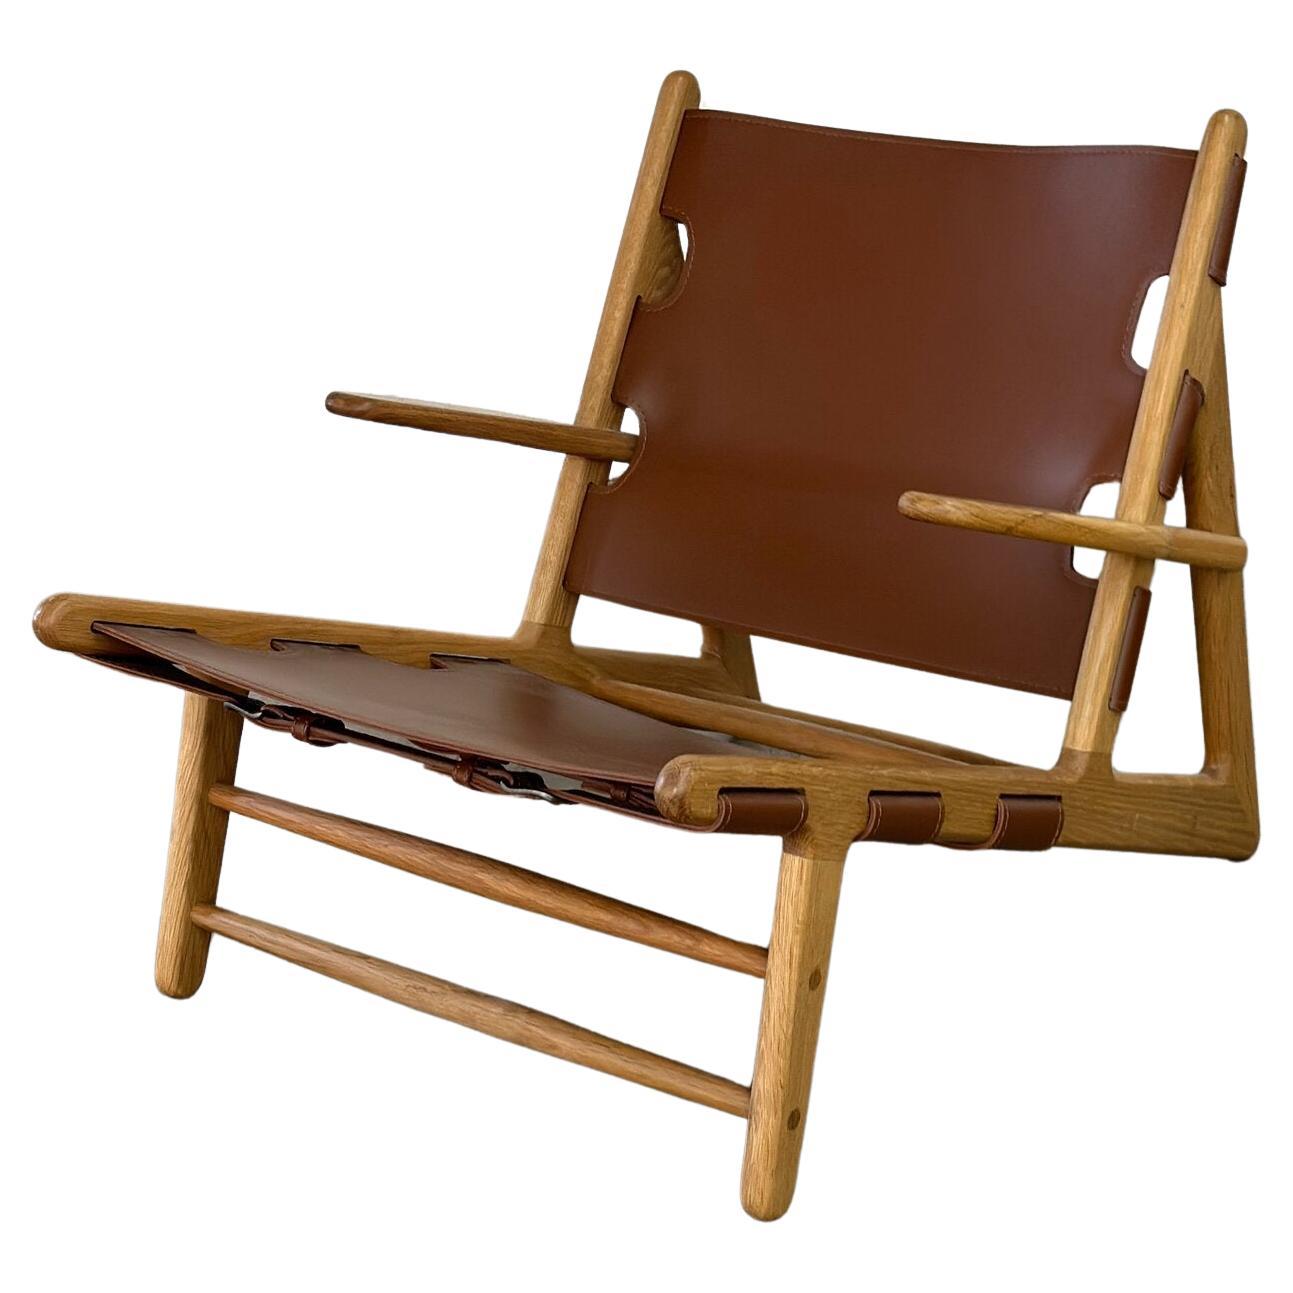 Contemporary leather and oak lounger